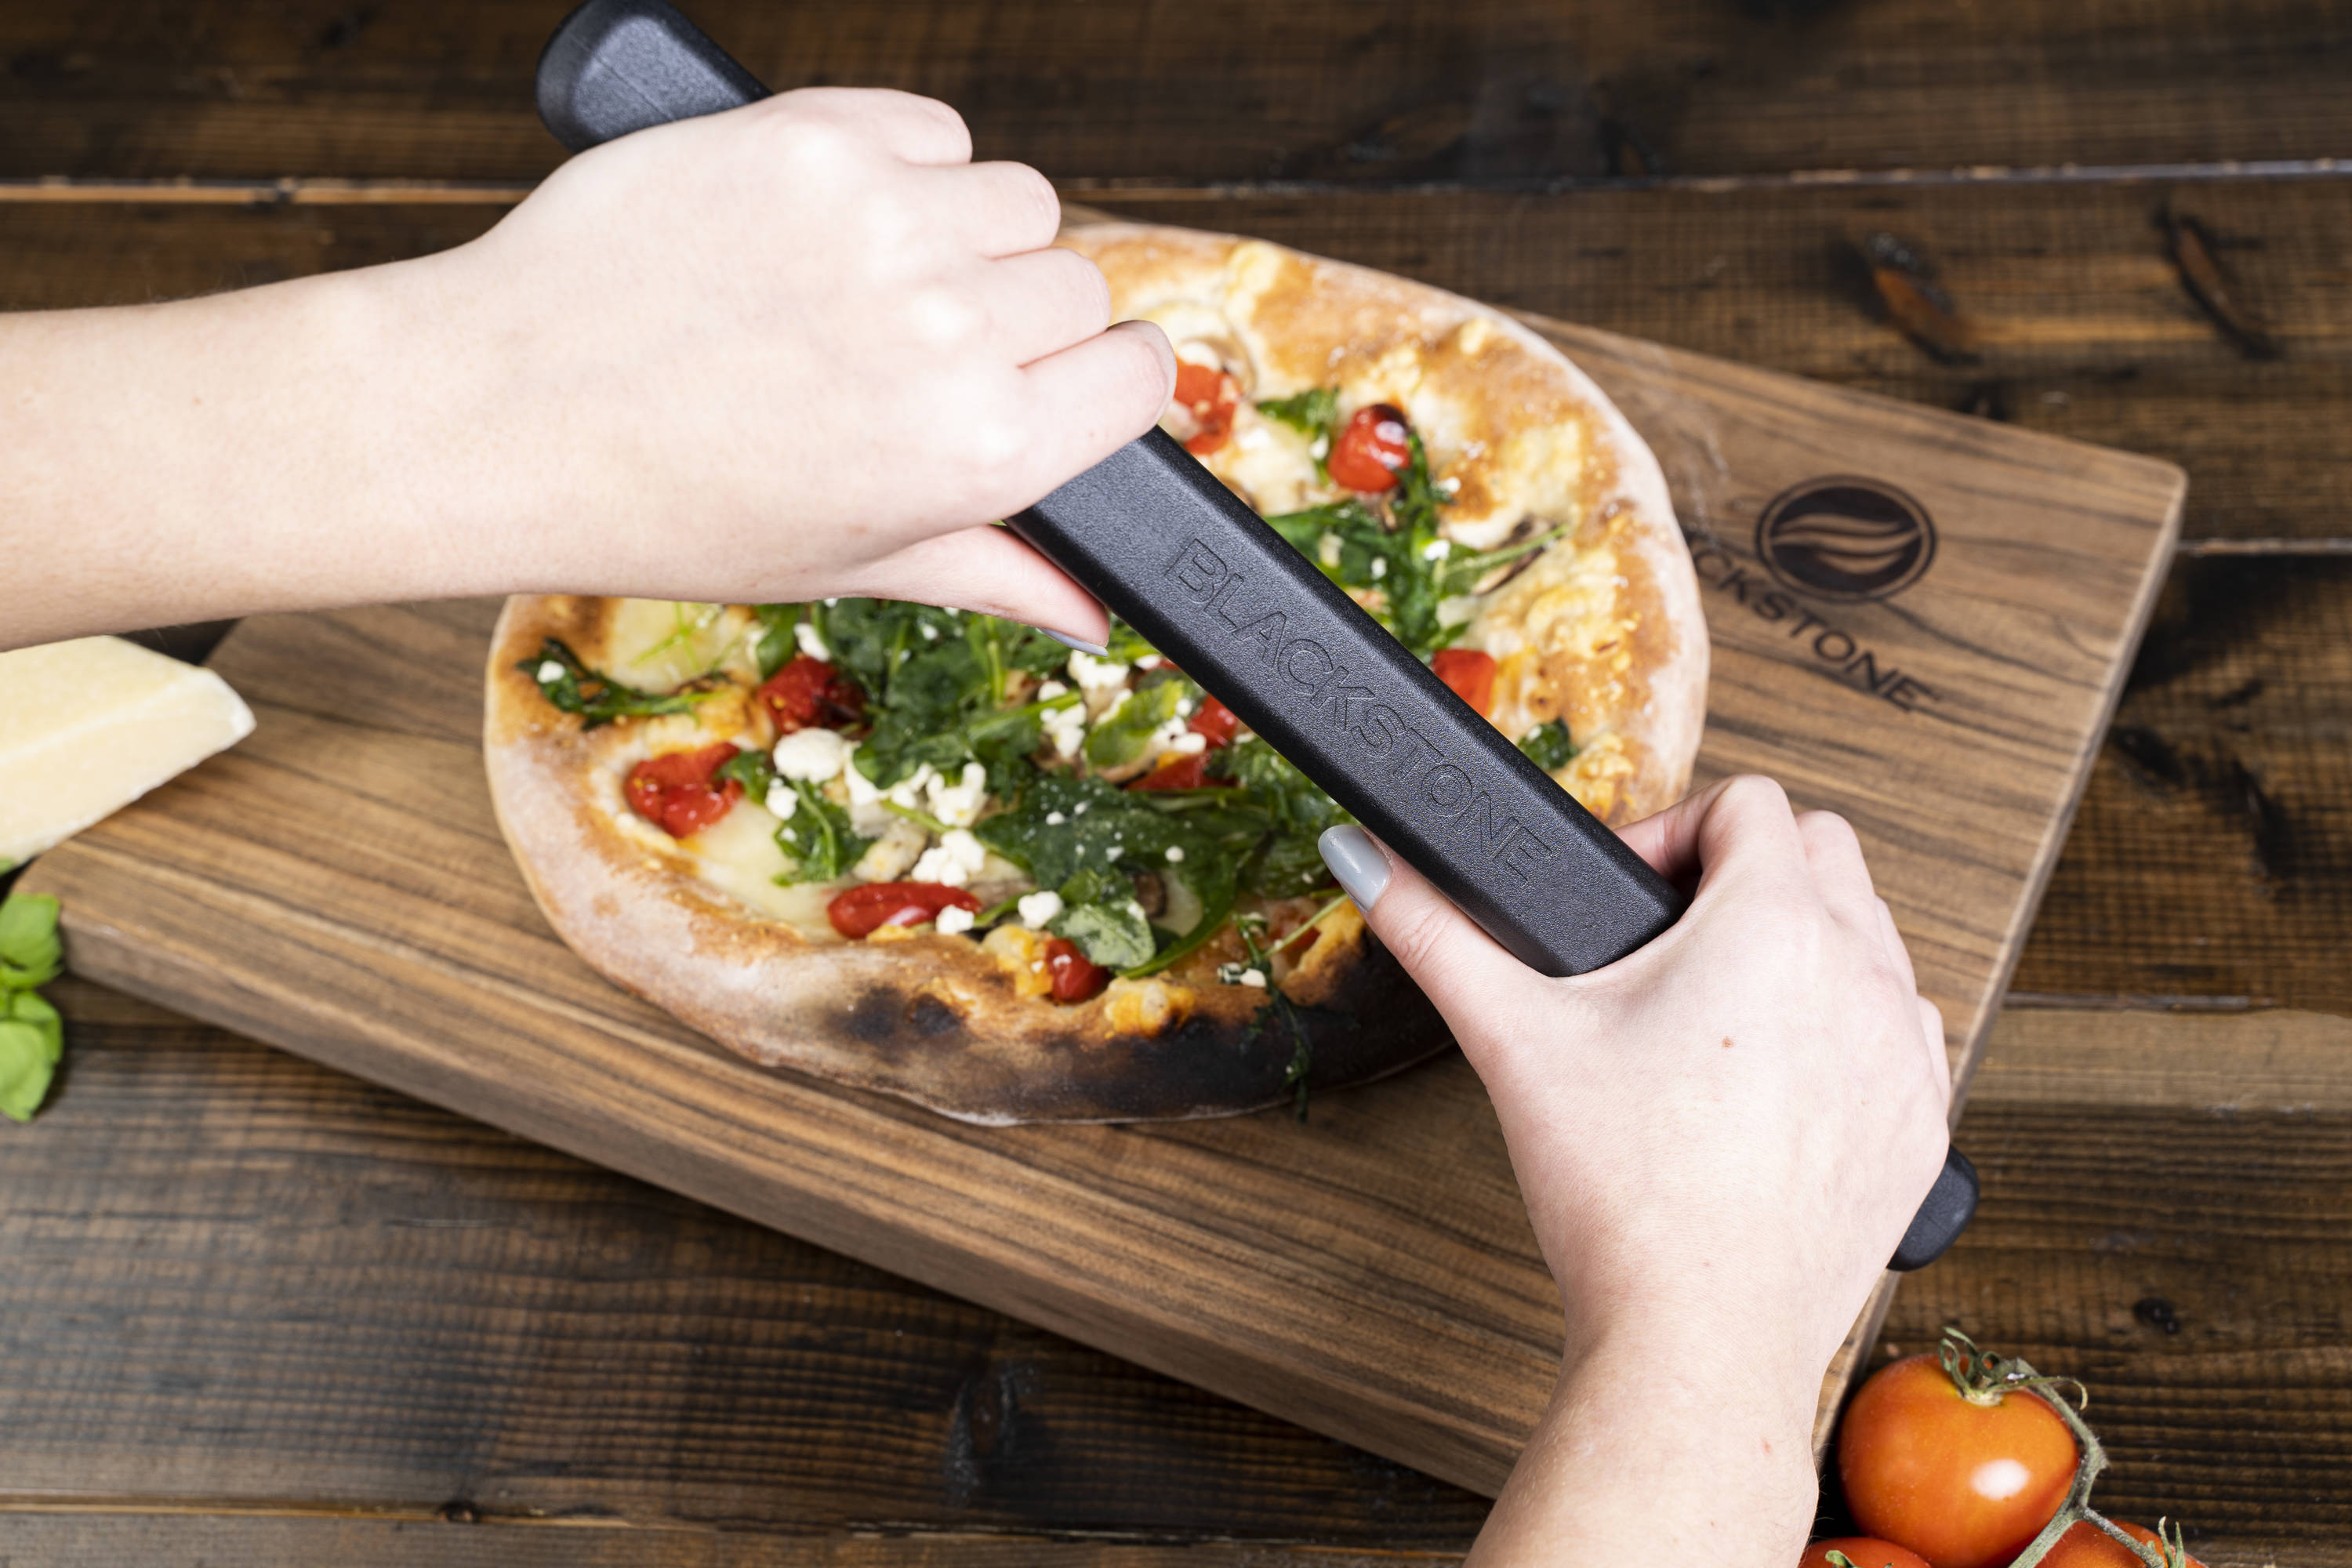 Everyday Living® Stainless Steel Pizza Cutter - Black, 1 ct - Food 4 Less